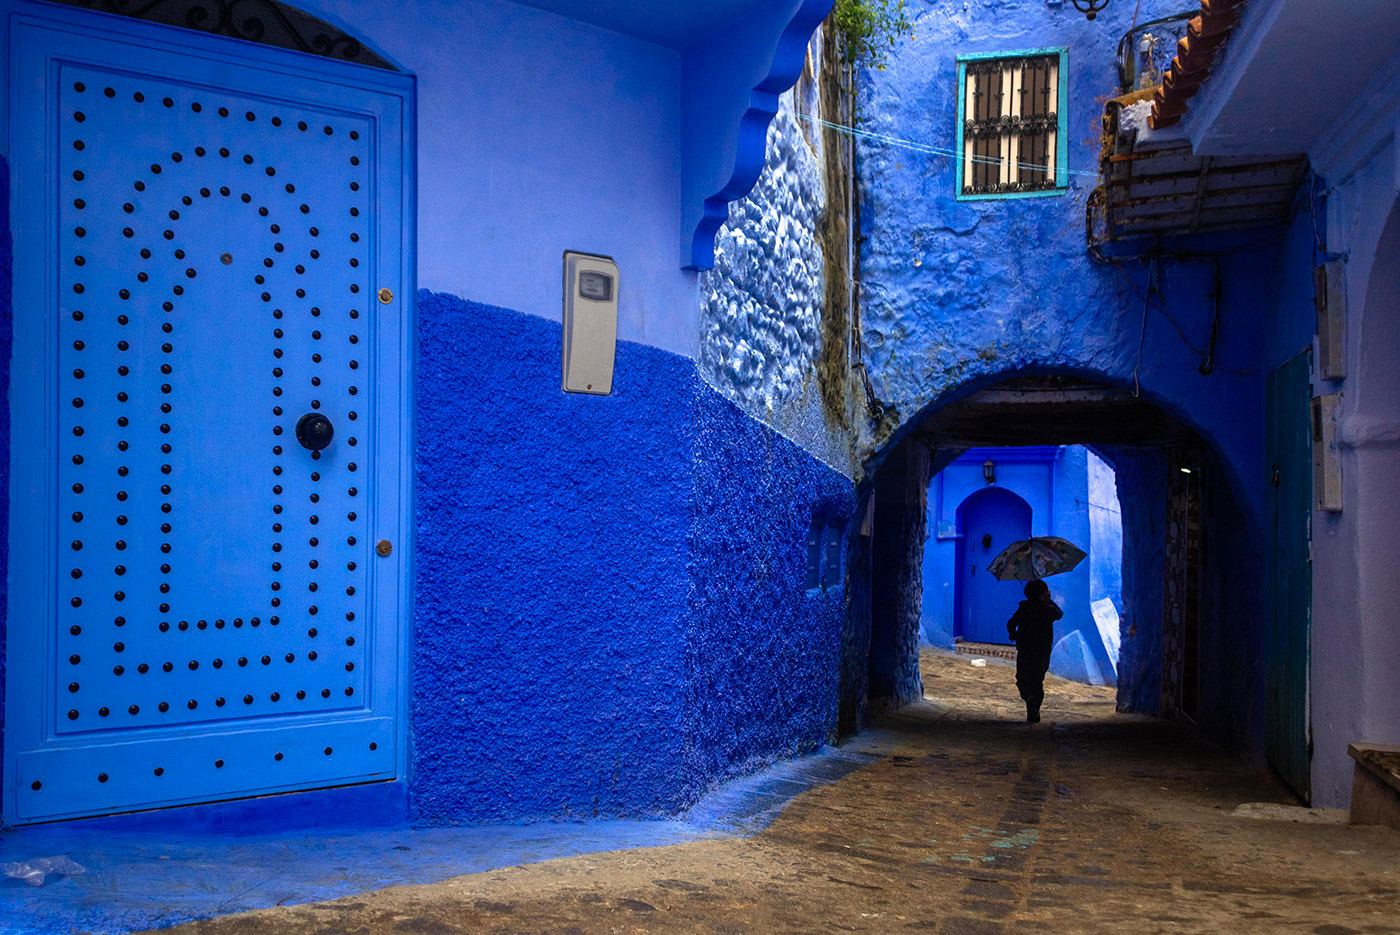 General 1400x935 architecture building old building street door umbrella Chefchaouen Morocco blue arch